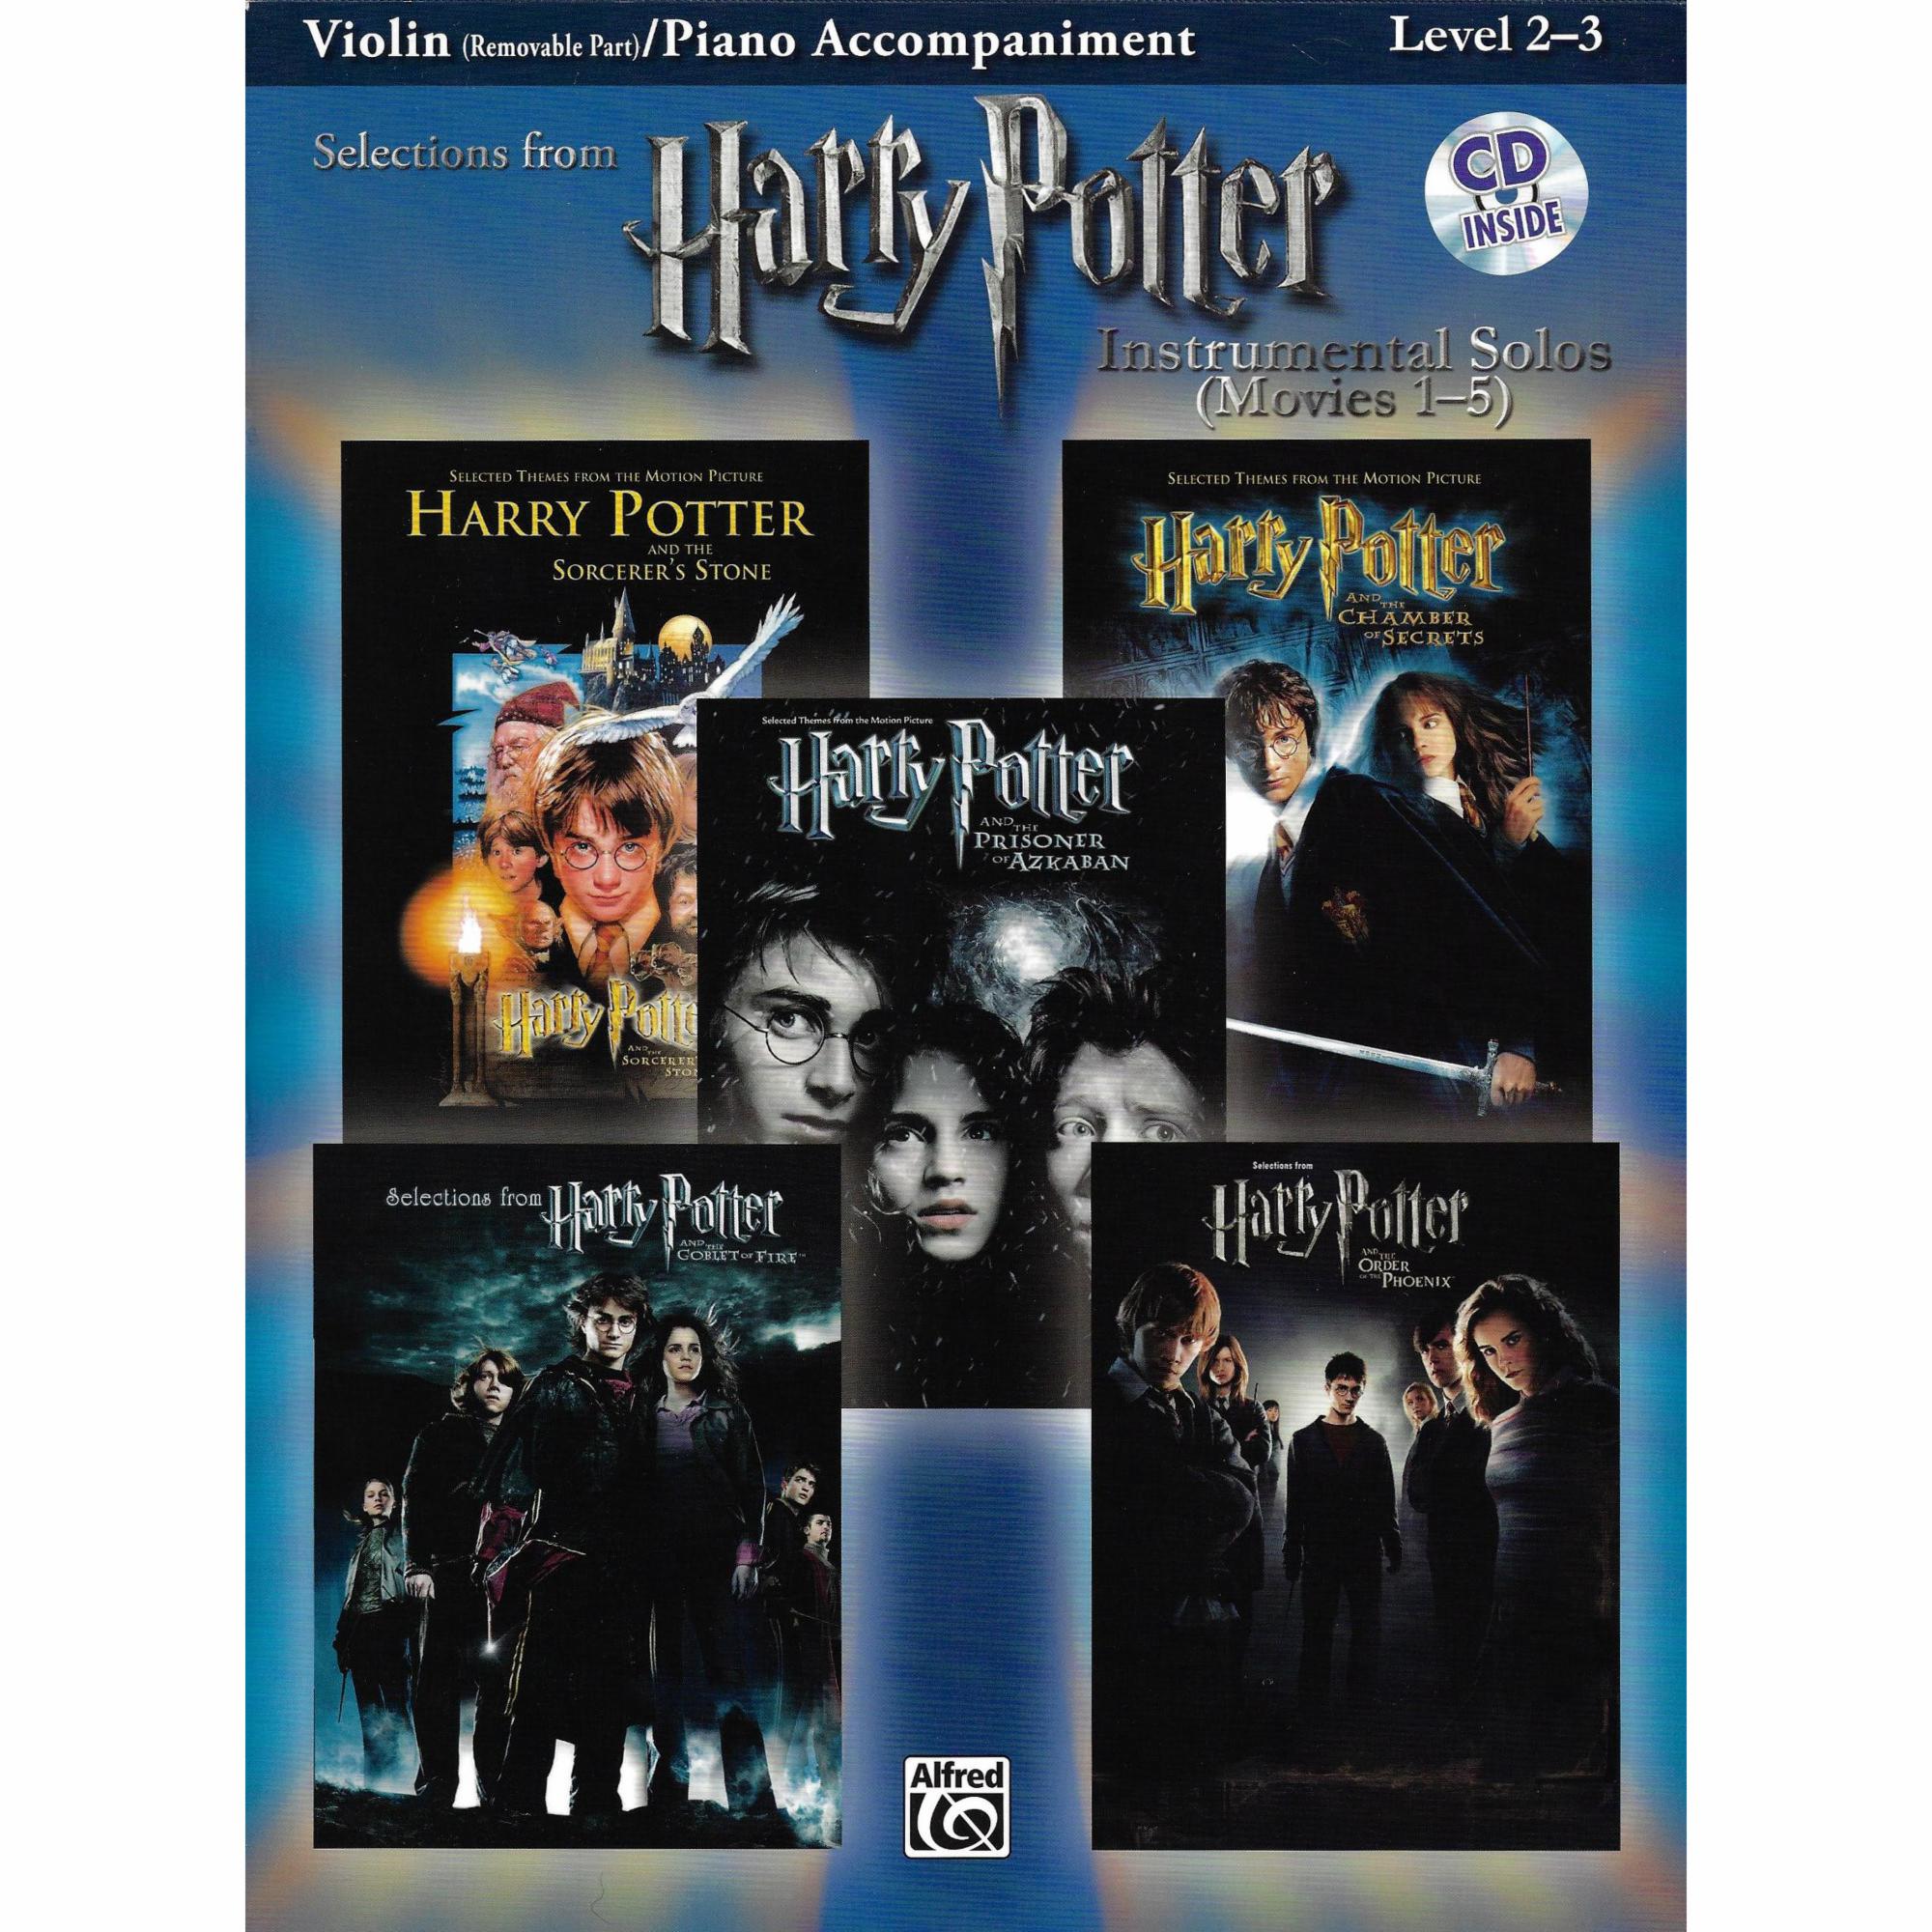 Harry Potter (Movies 1-5) for Violin or Cello and Piano